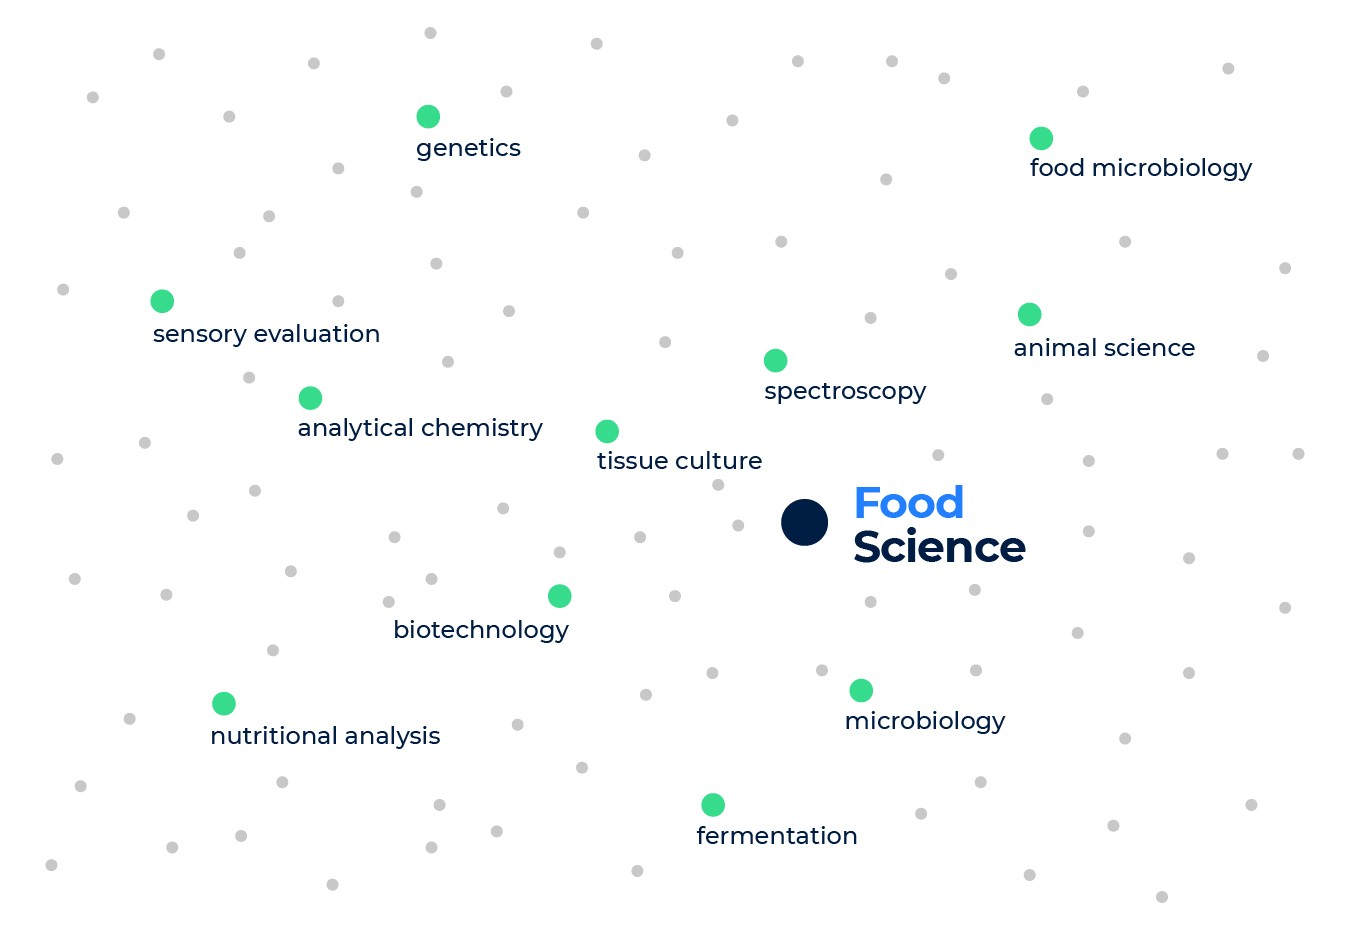 The nearest neighbors to the food science skill, such as spectroscopy, microbiology, animal science, biotechnology and more.